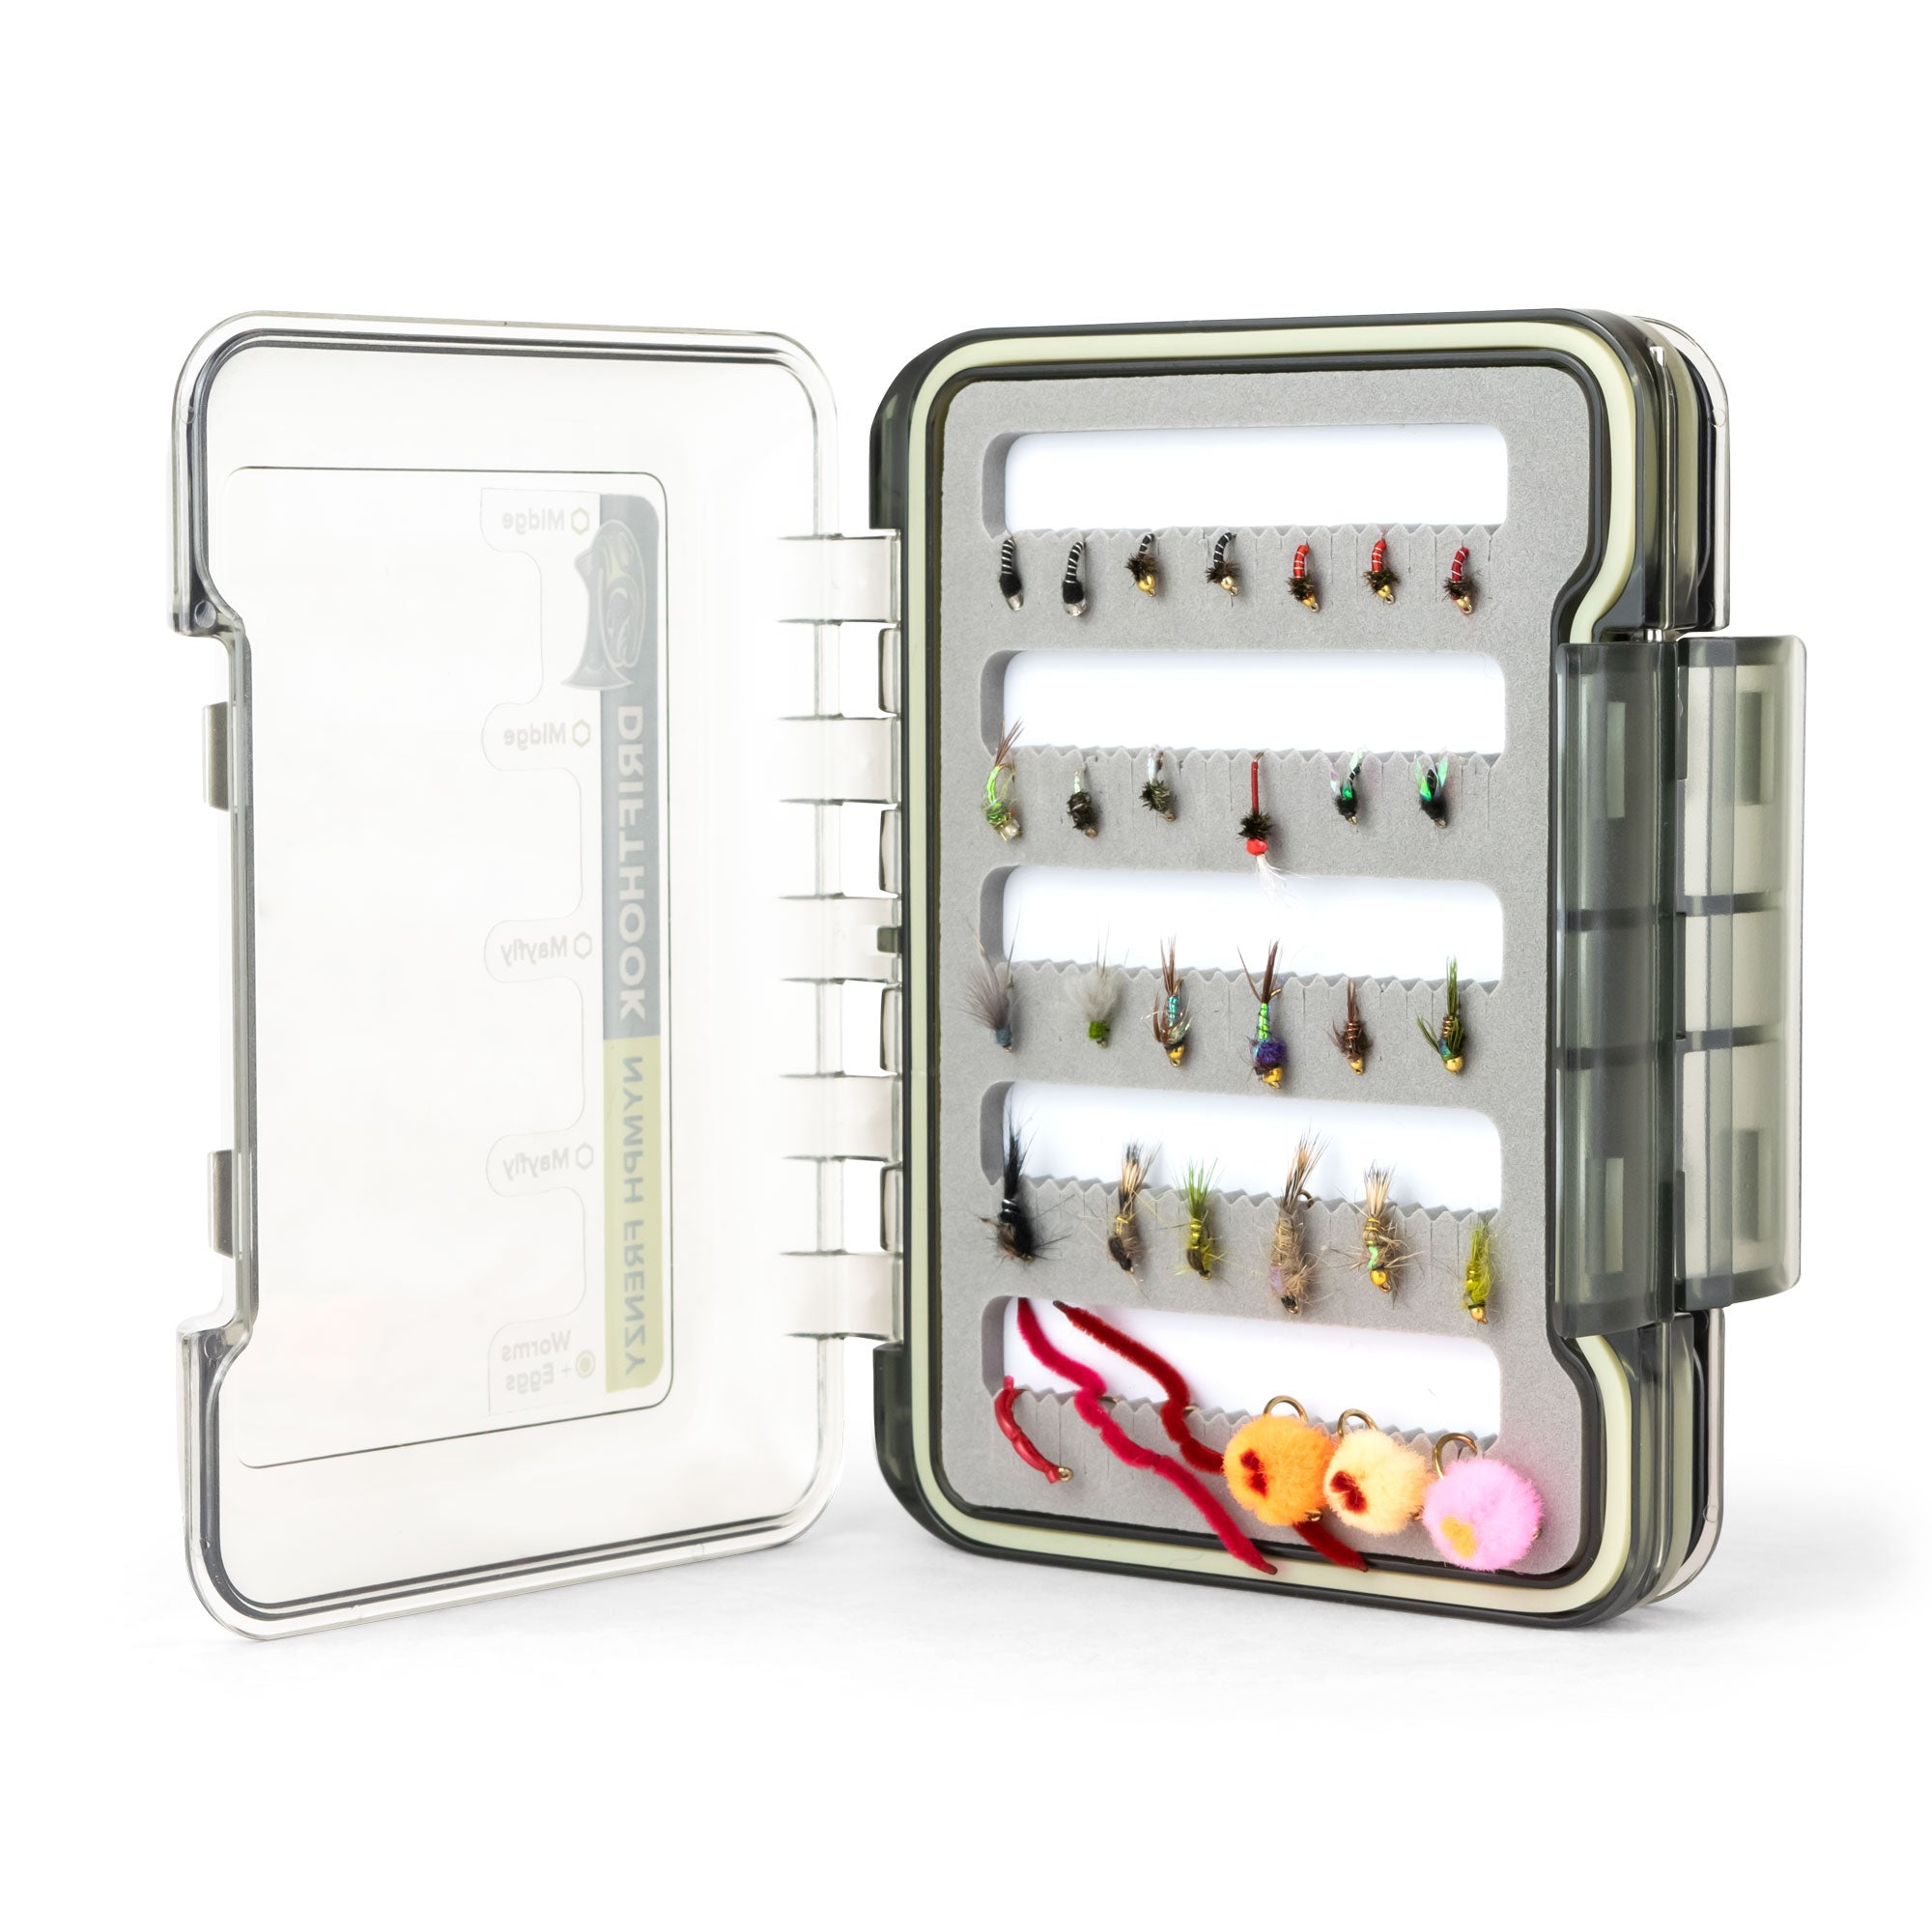  koity Fly Fishing Flies Kit, 36pcs Hand Tied Fly Fishing Lures  with Waterproof Fly Box Fly Fishing Gear Assortment Kit Dry Wet Flies  Nymphs Popper Streamers Hopper Caddis Gnat Stonefly